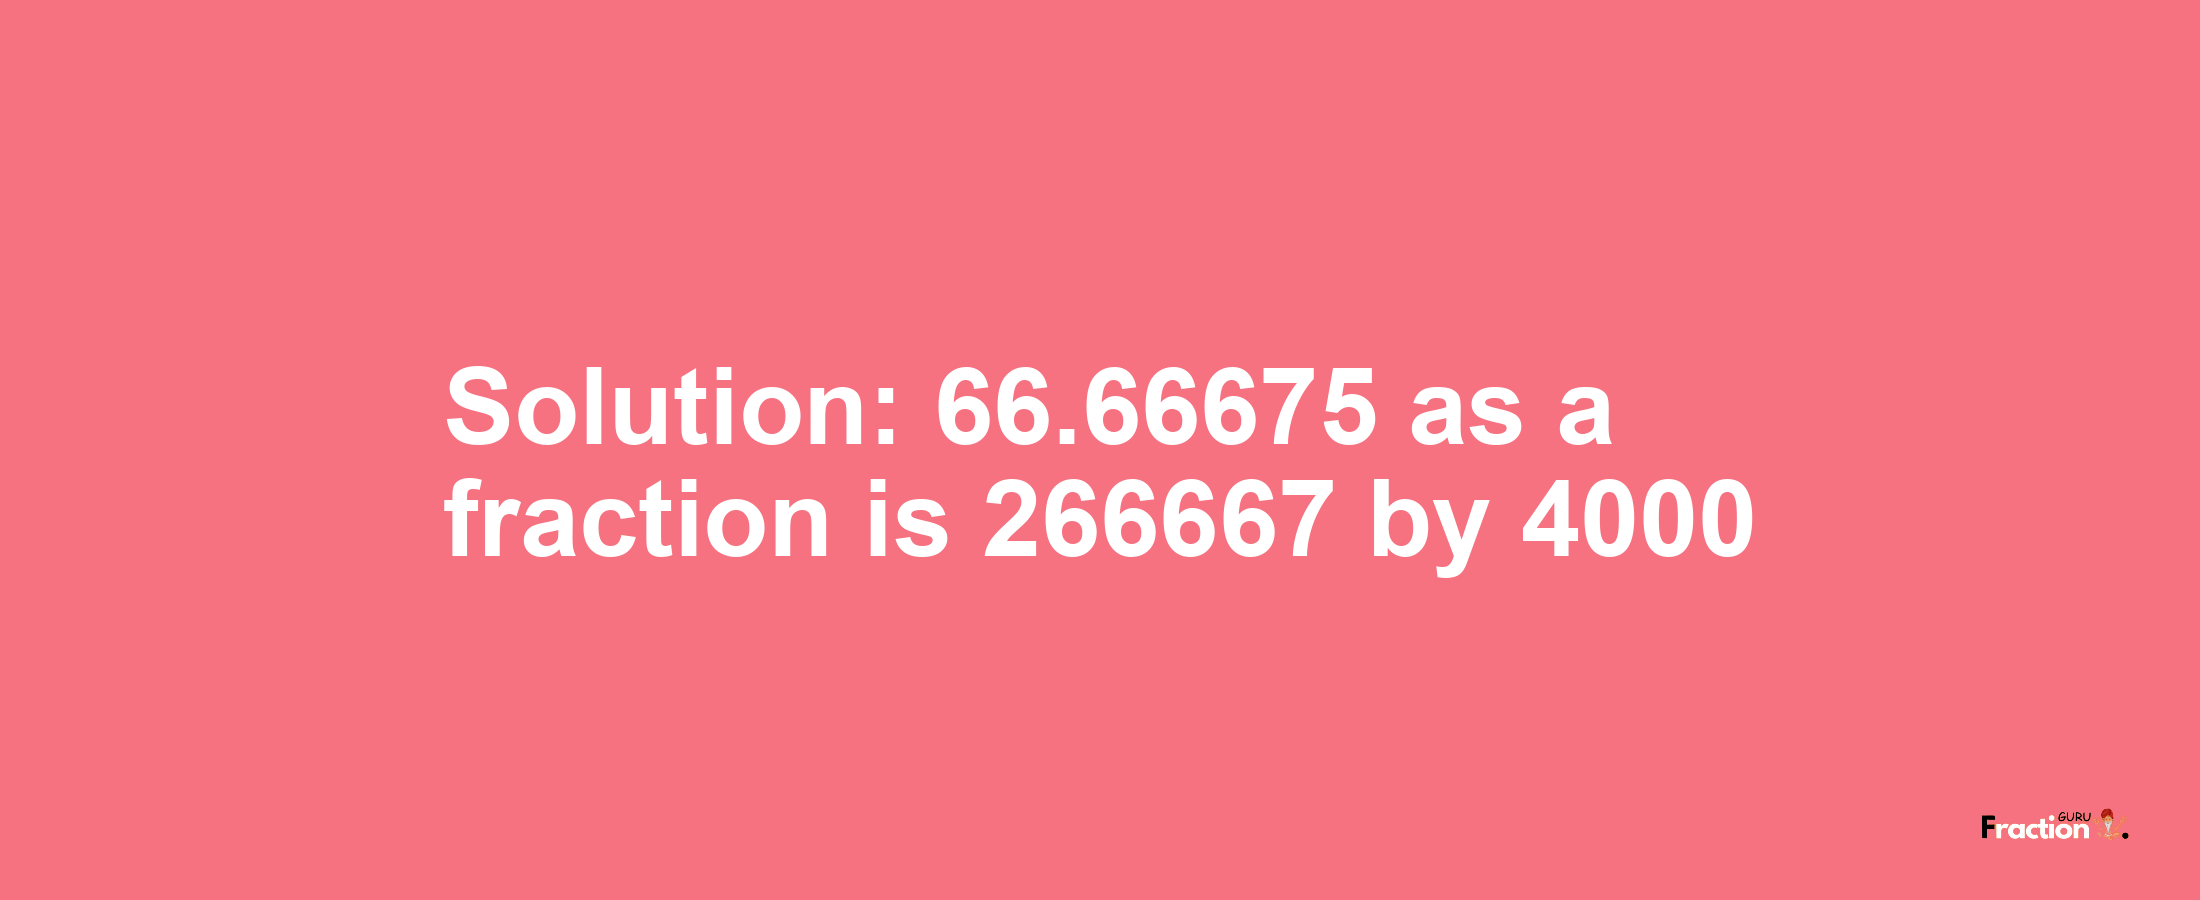 Solution:66.66675 as a fraction is 266667/4000